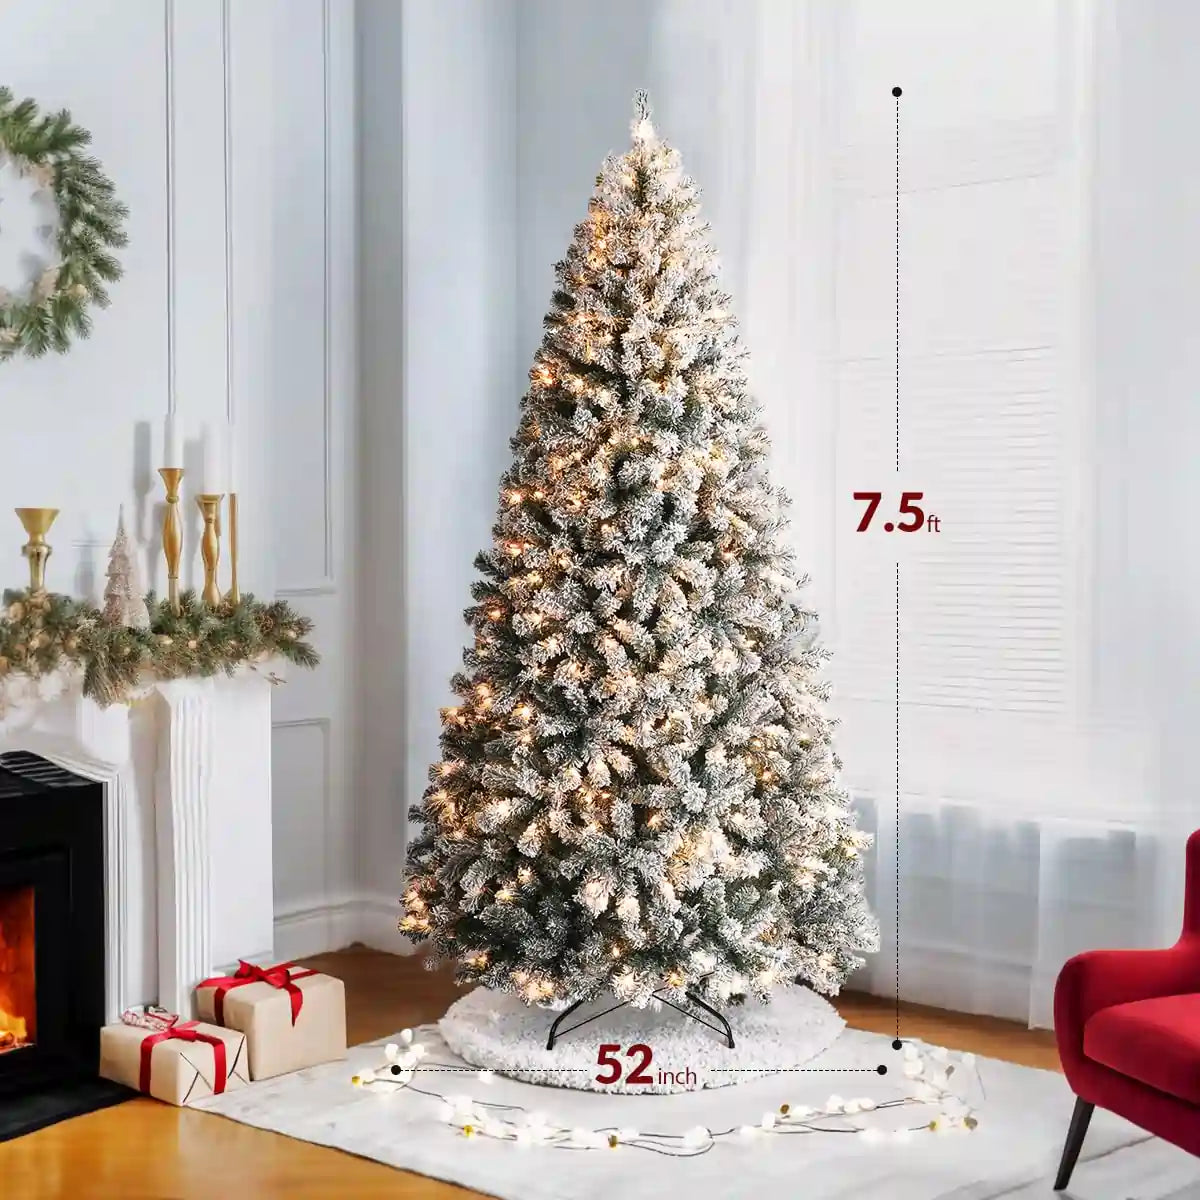 OasisCraft 7.5 ft Snow Flocked Christmas Tree Size#size_7.5FT